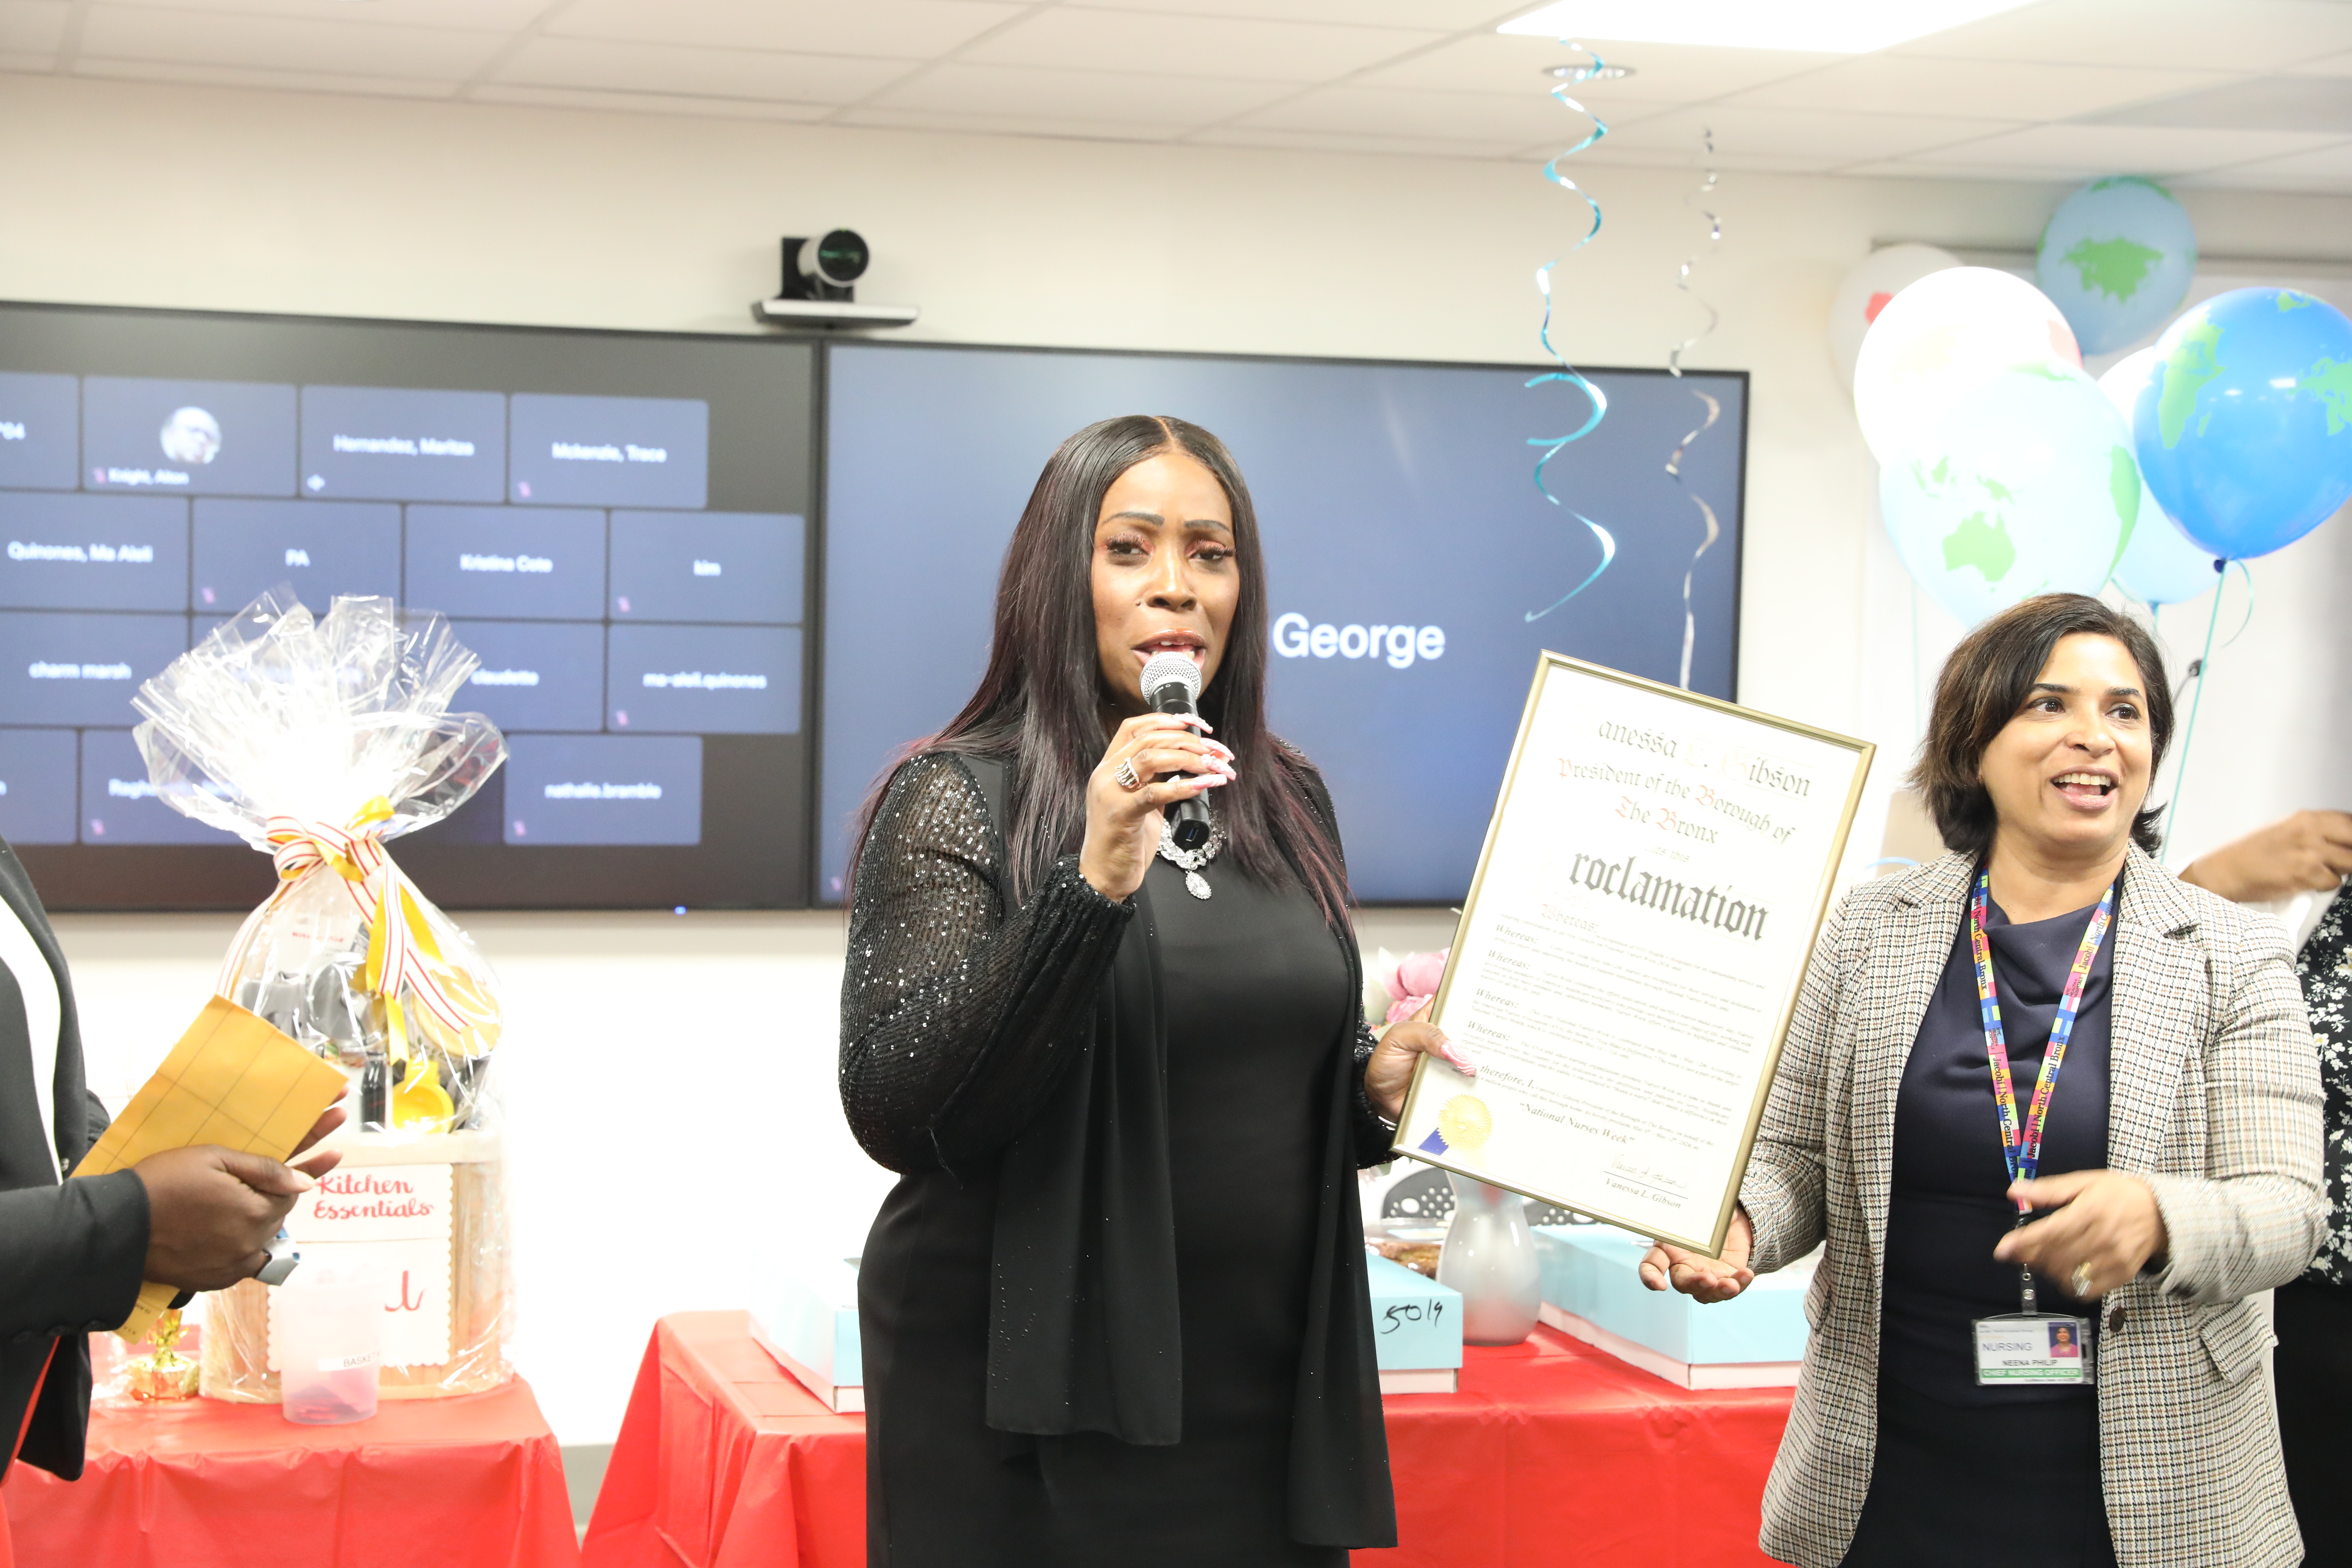 Bronx Borough President Vanessa Gibson visited NYC Health + Hospitals/North Central Bronx (NCB) during National Nurses Week to celebrate the nursing heroes at the facility.